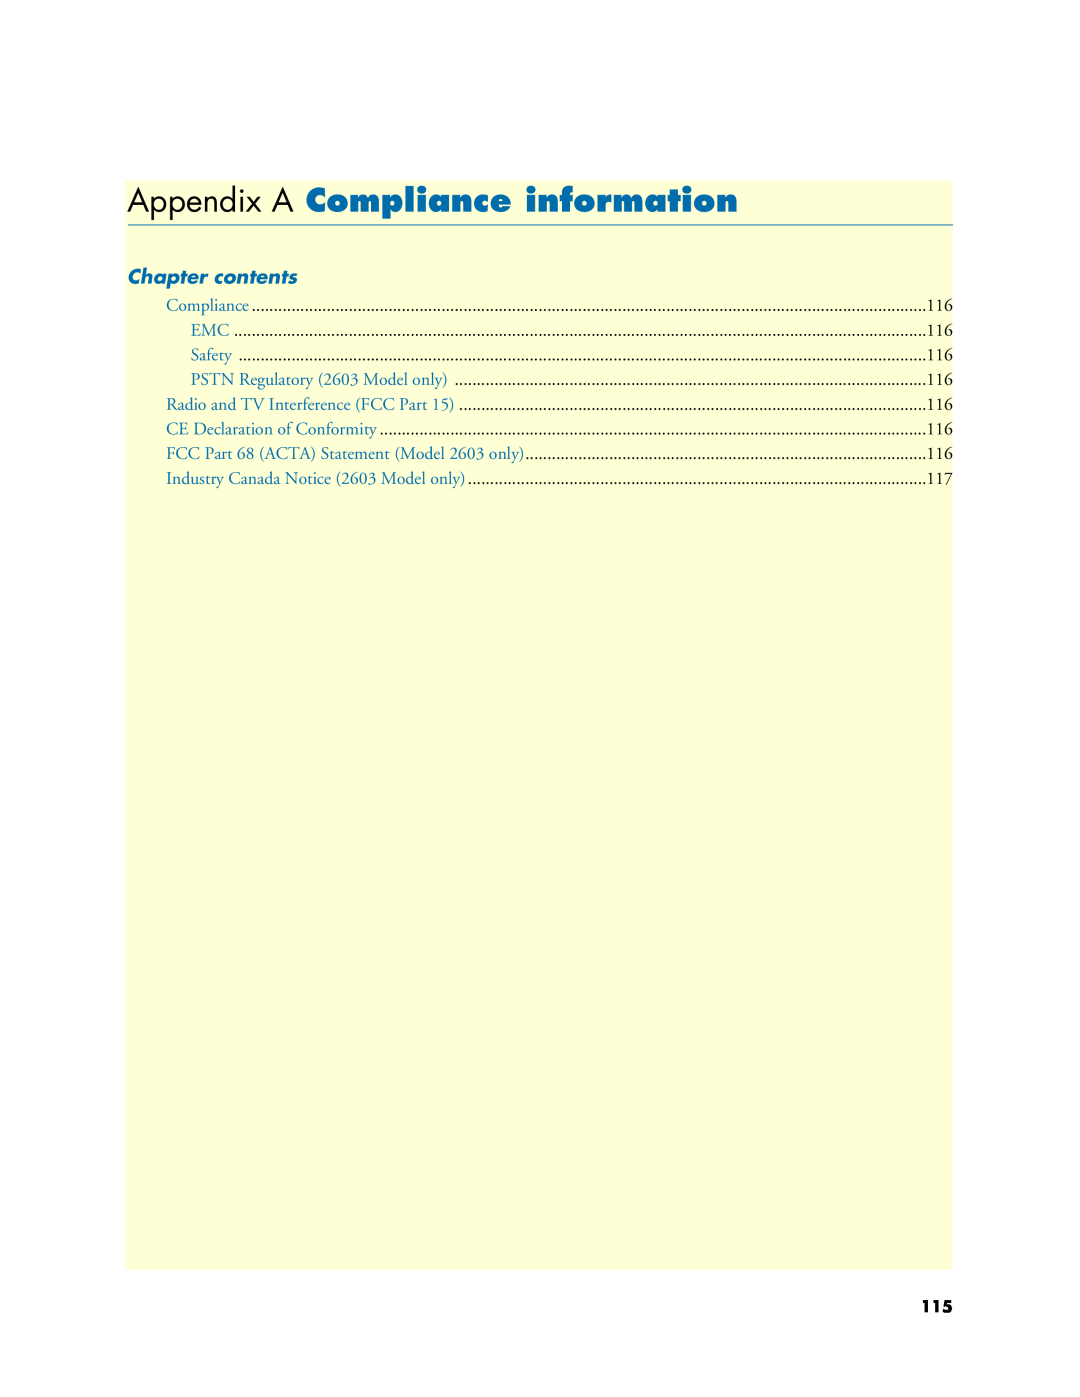 Patton electronic 2635, 2621 manual Appendix A Compliance information, Chapter contents 